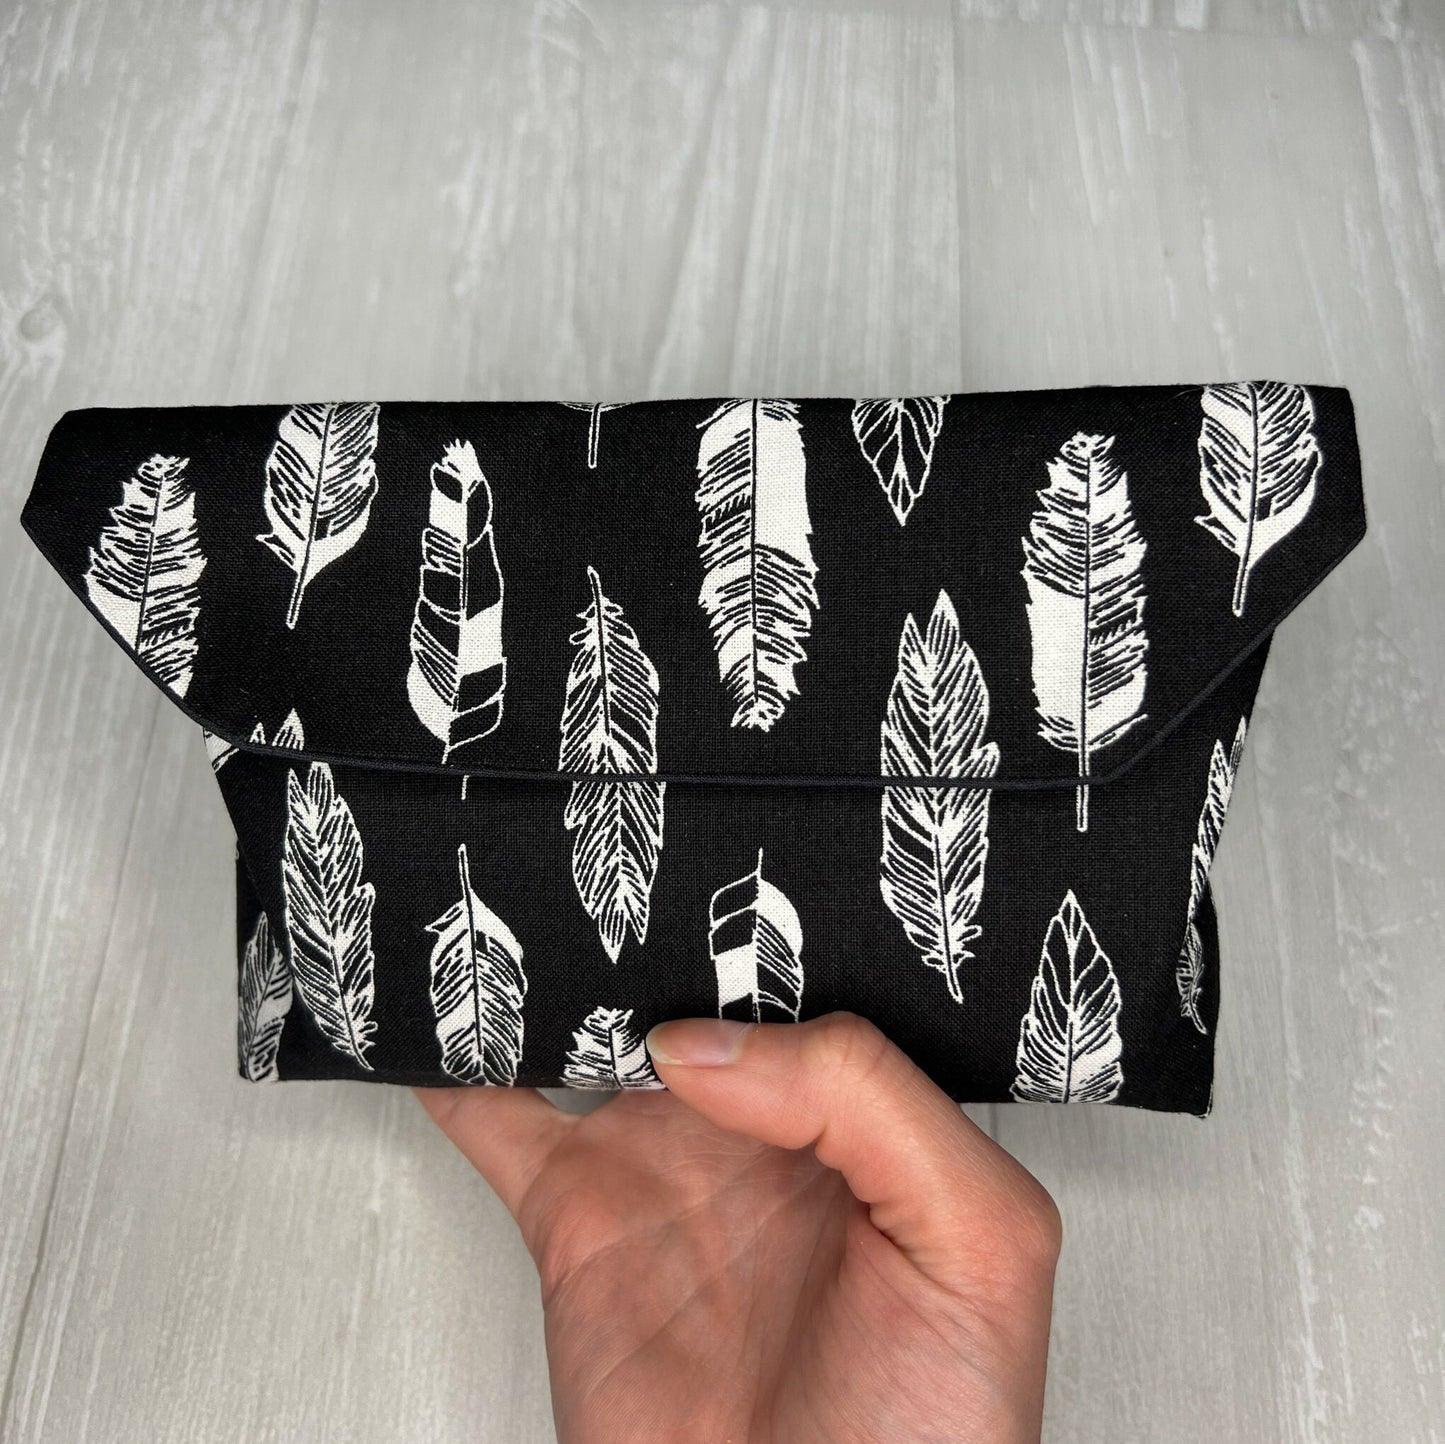 Feather Tarot Clutch Pouch, Fold Over Magnetic Clasp Tarot Pouch, Tarot Reading Gifts Supplies & Accessories, Tarot Card Storage Holder